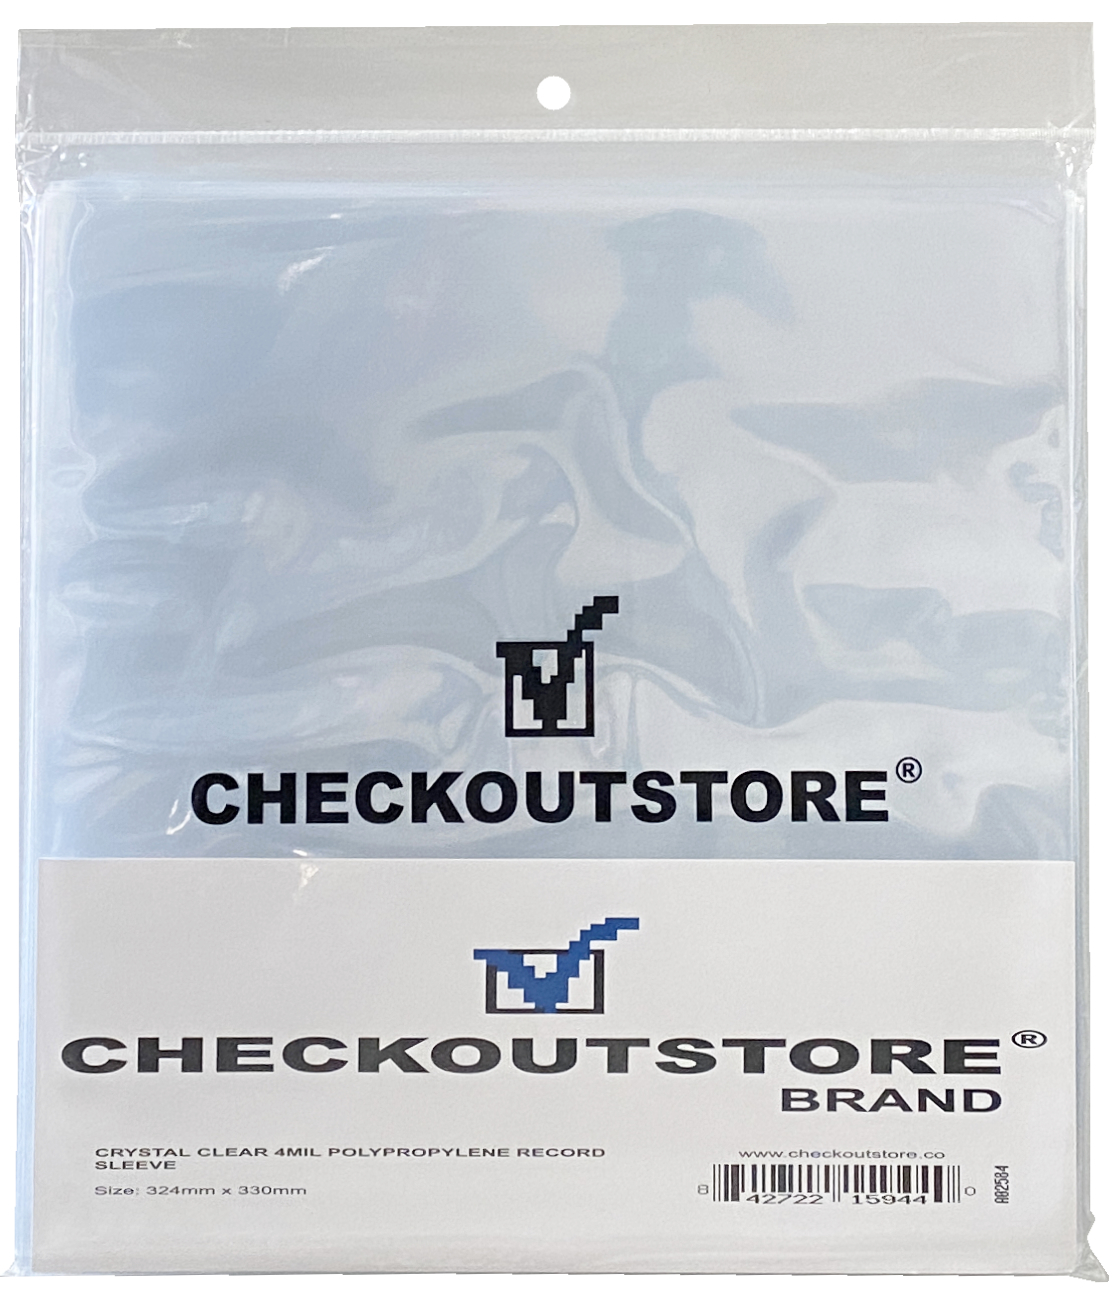 CheckOutStore 5,000 CheckOutStore Clear Plastic OPP for 12" LP Vinyl Record Album Covers 4 Mil (Outer Sleeves)